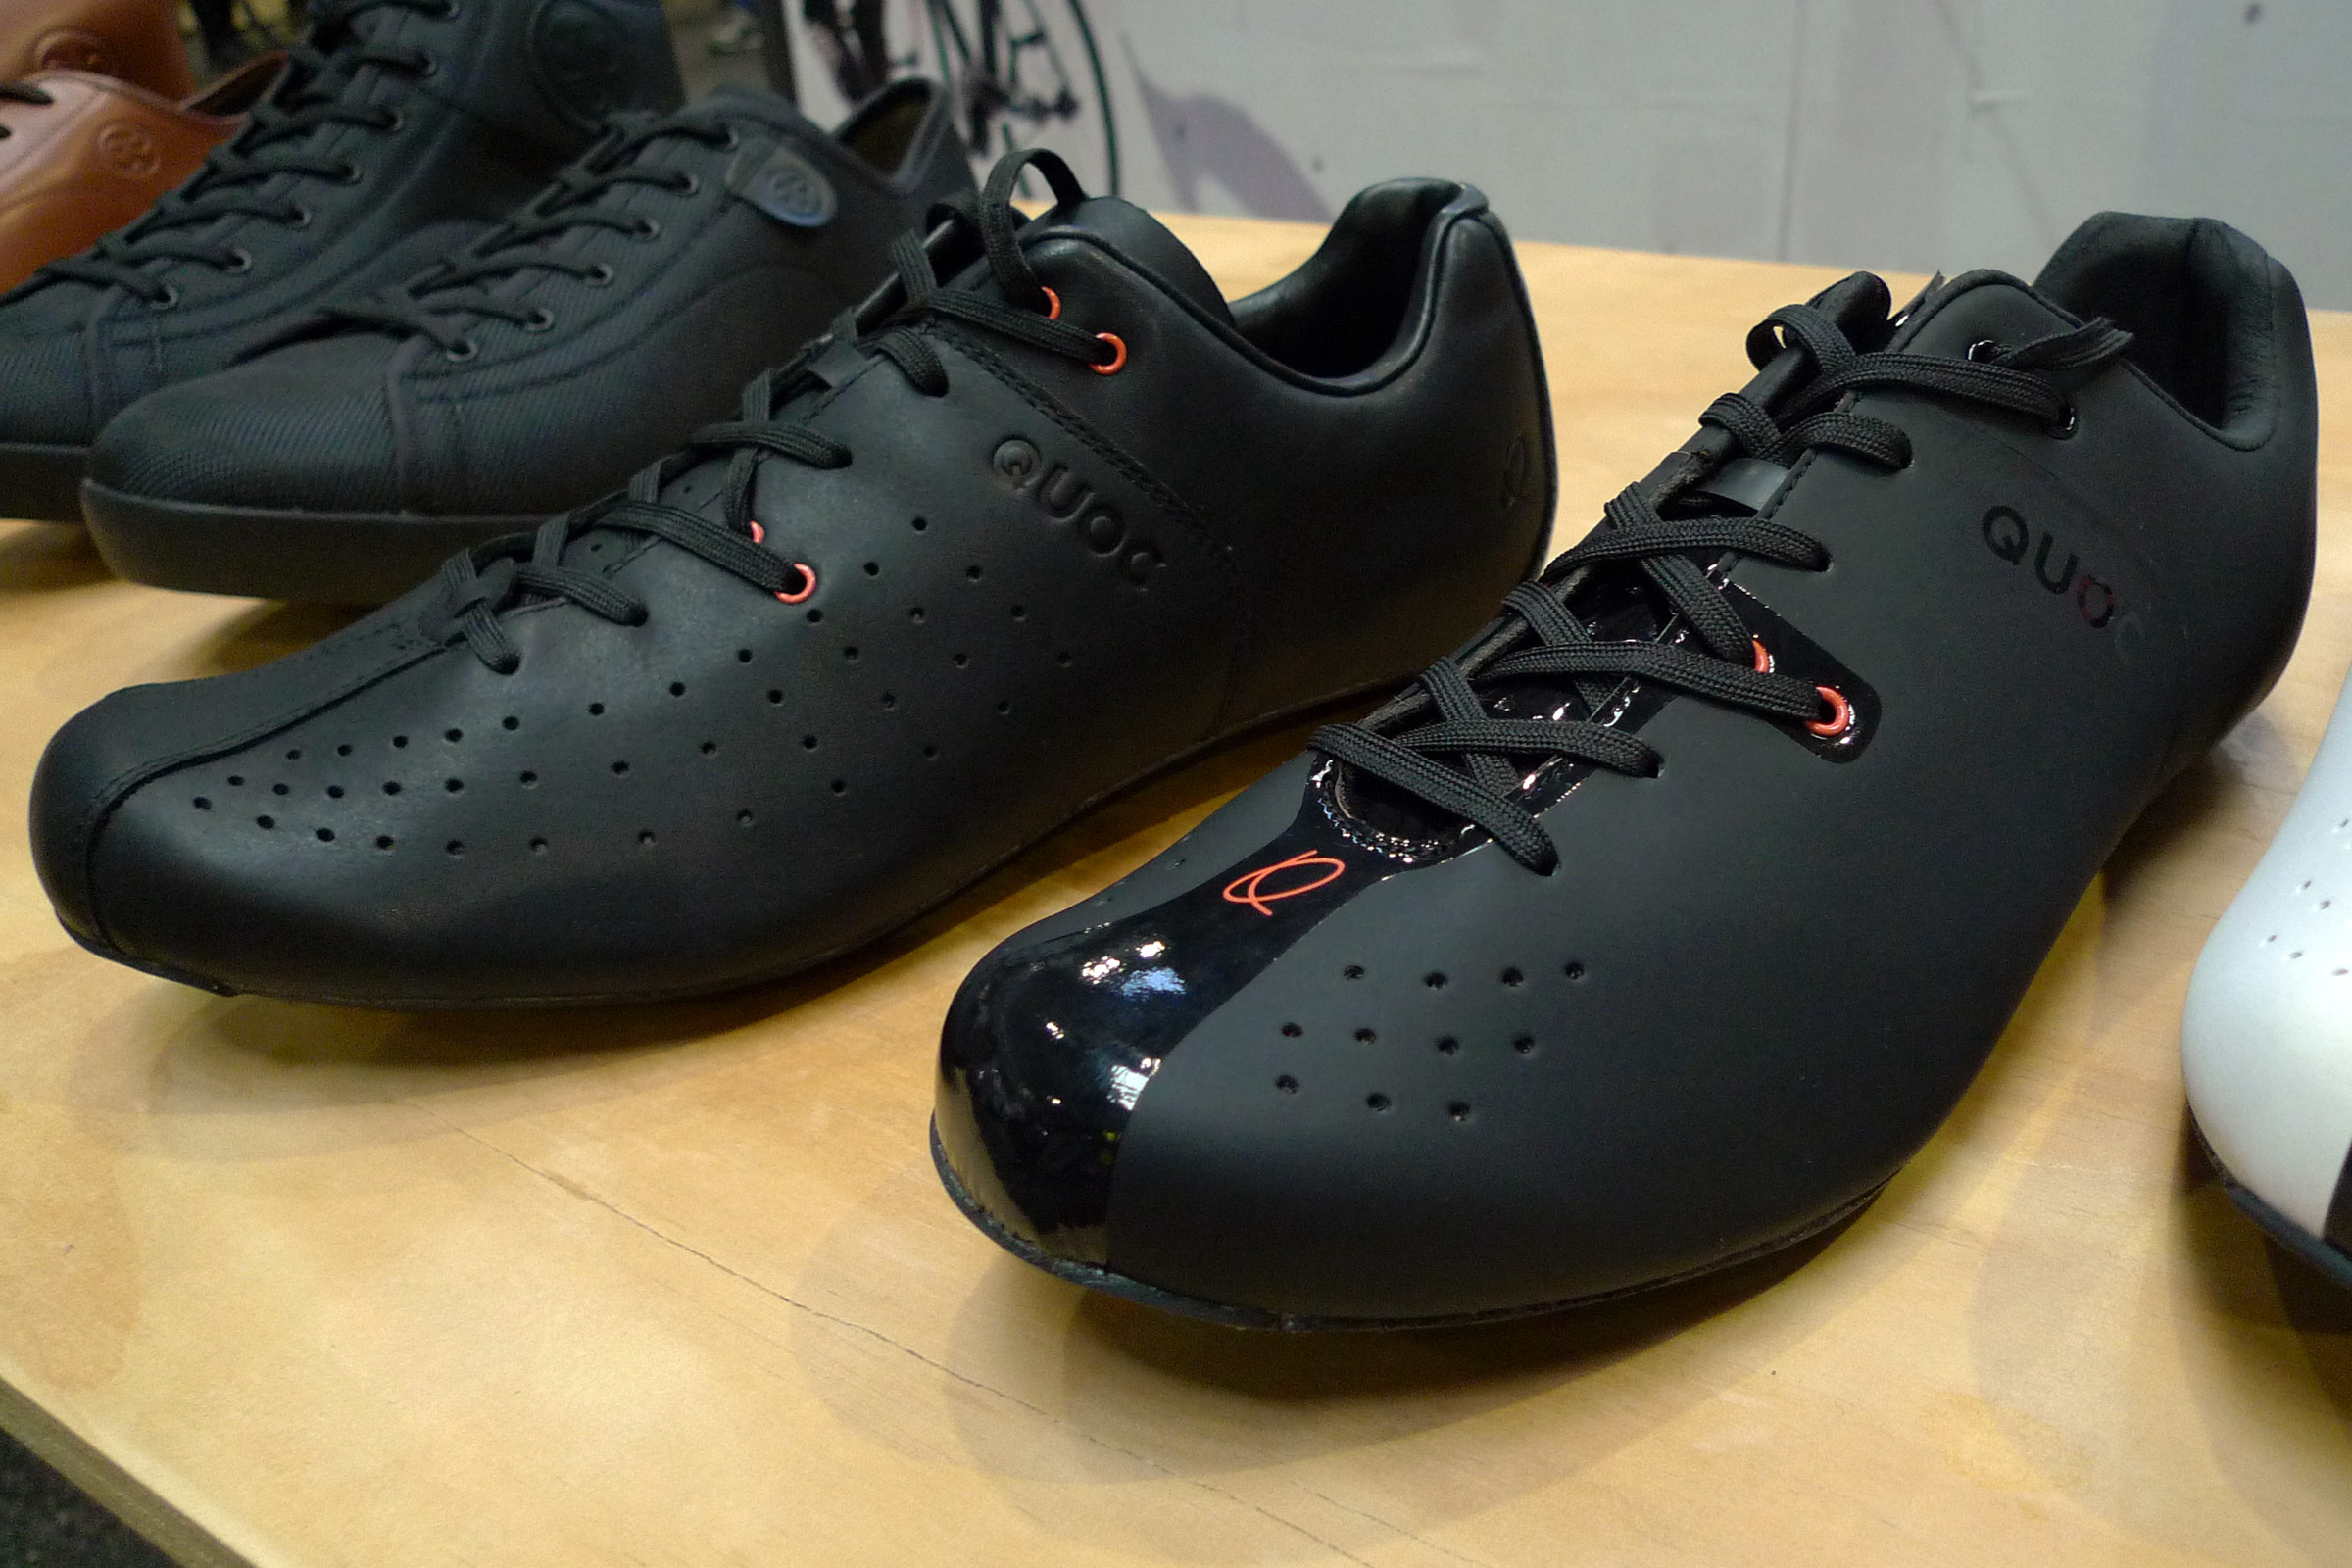 BFS 2016: Quoc debuts lace-up Night Road shoes in leather or synthetics